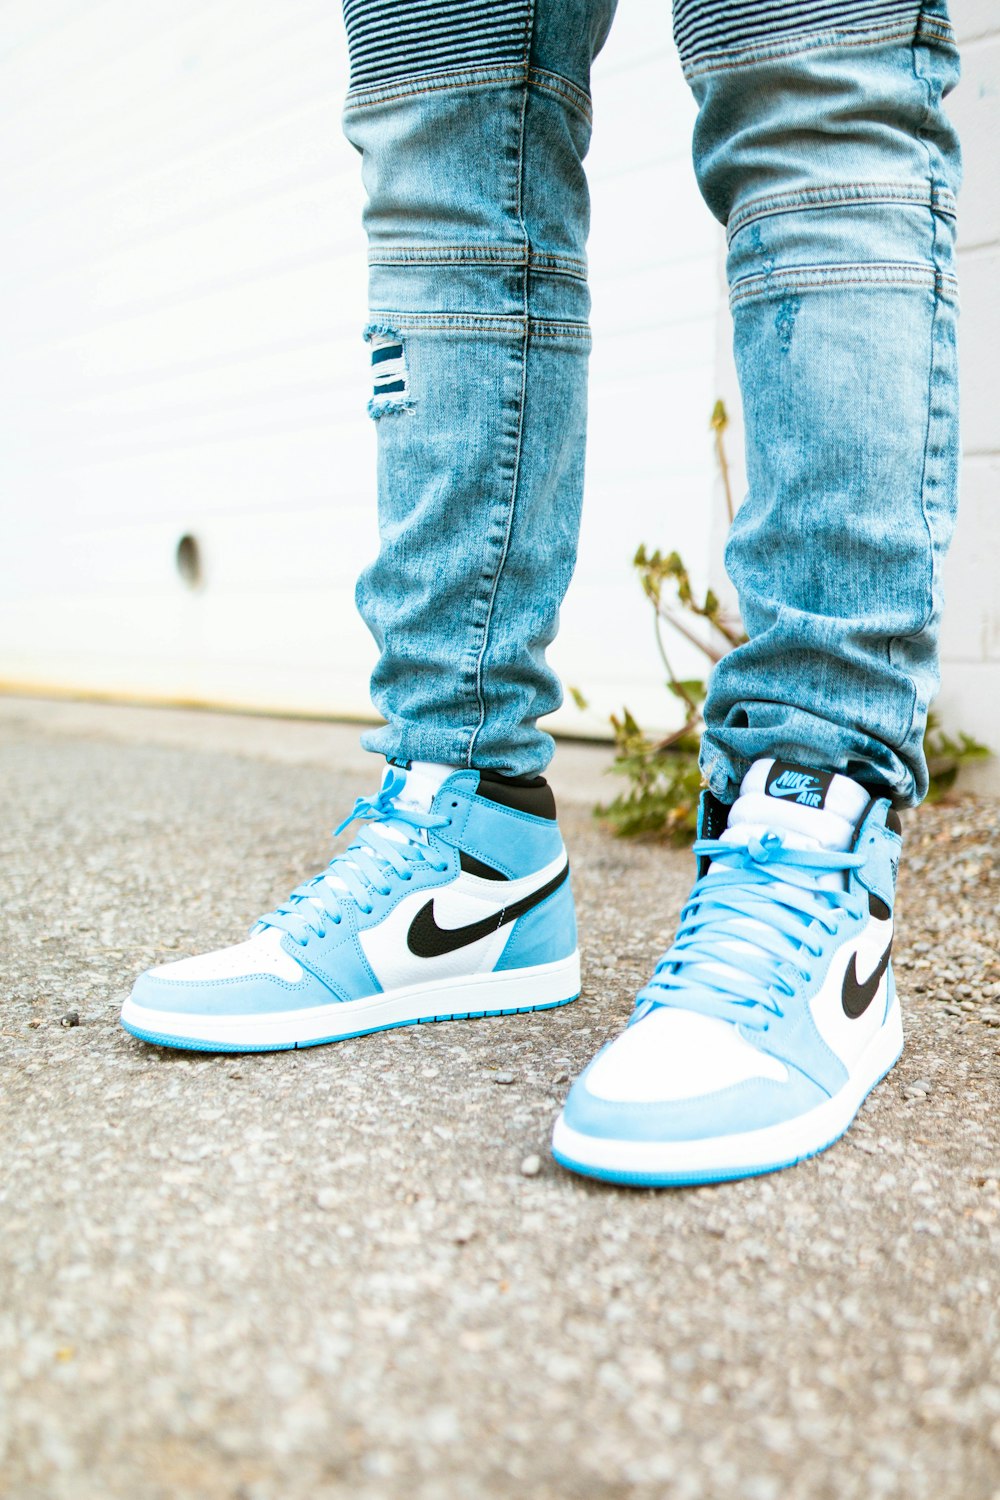 Person in Blue Denim Jeans and Blue Nike Sneakers · Free Stock Photo